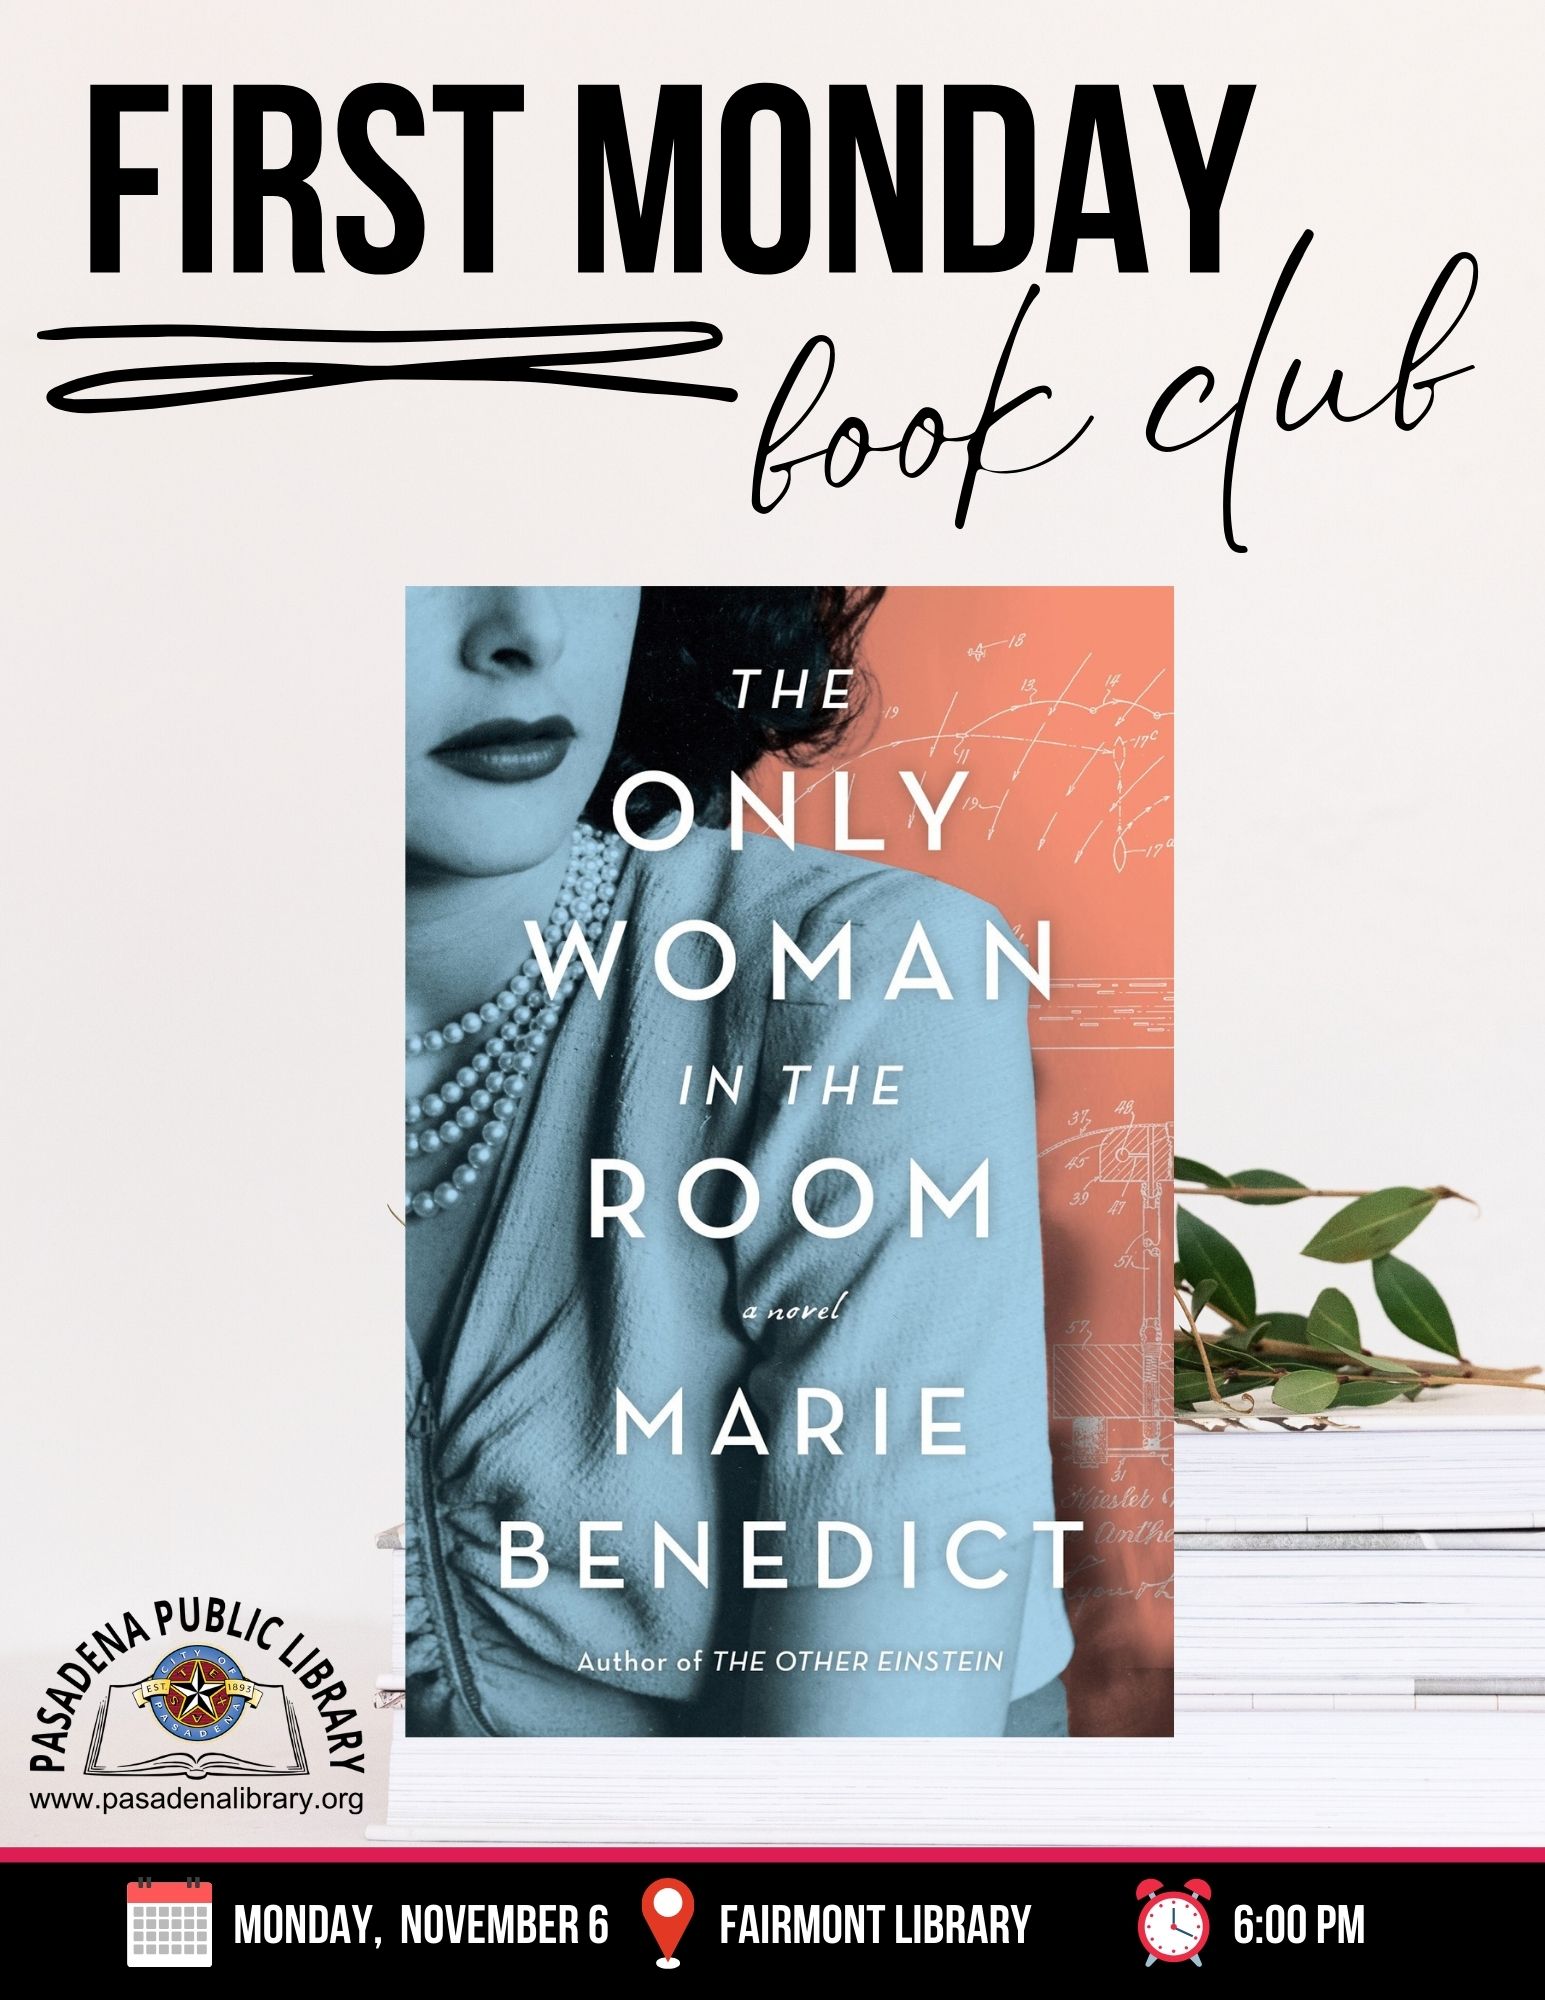 FIRST MONDAY BOOK CLUB